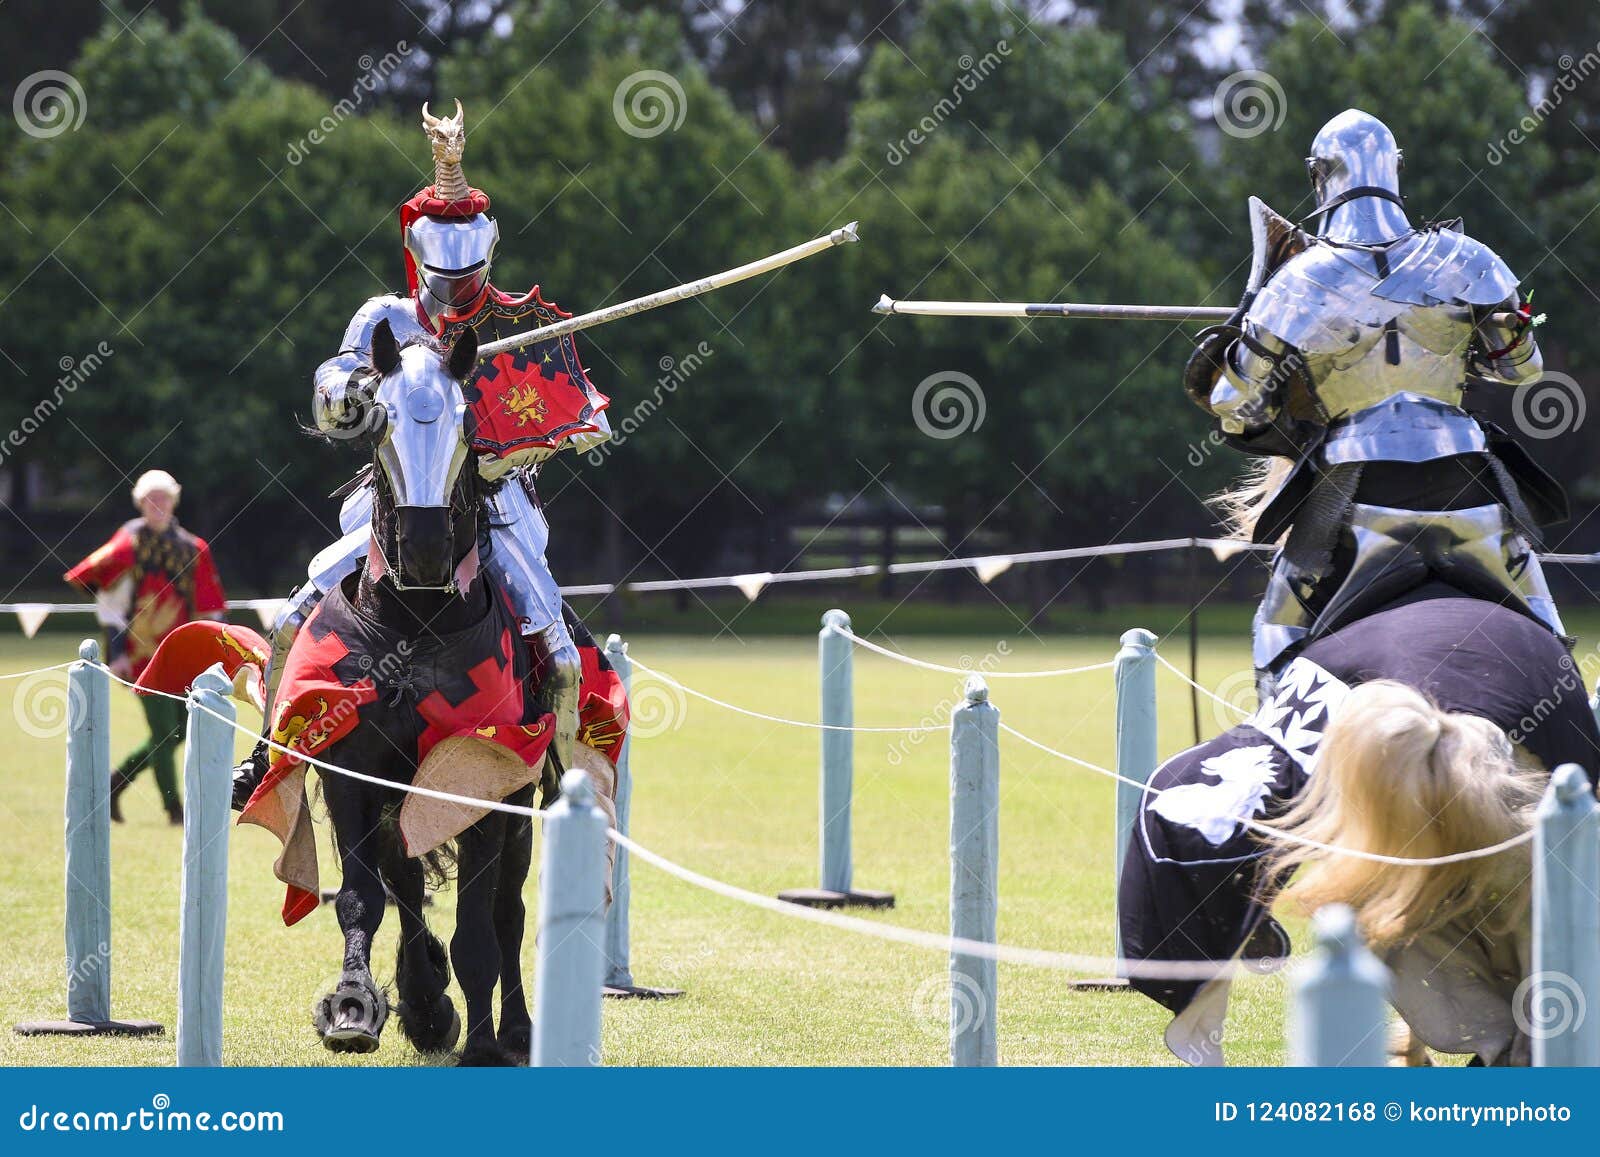 A New Model For medieval jousting rules